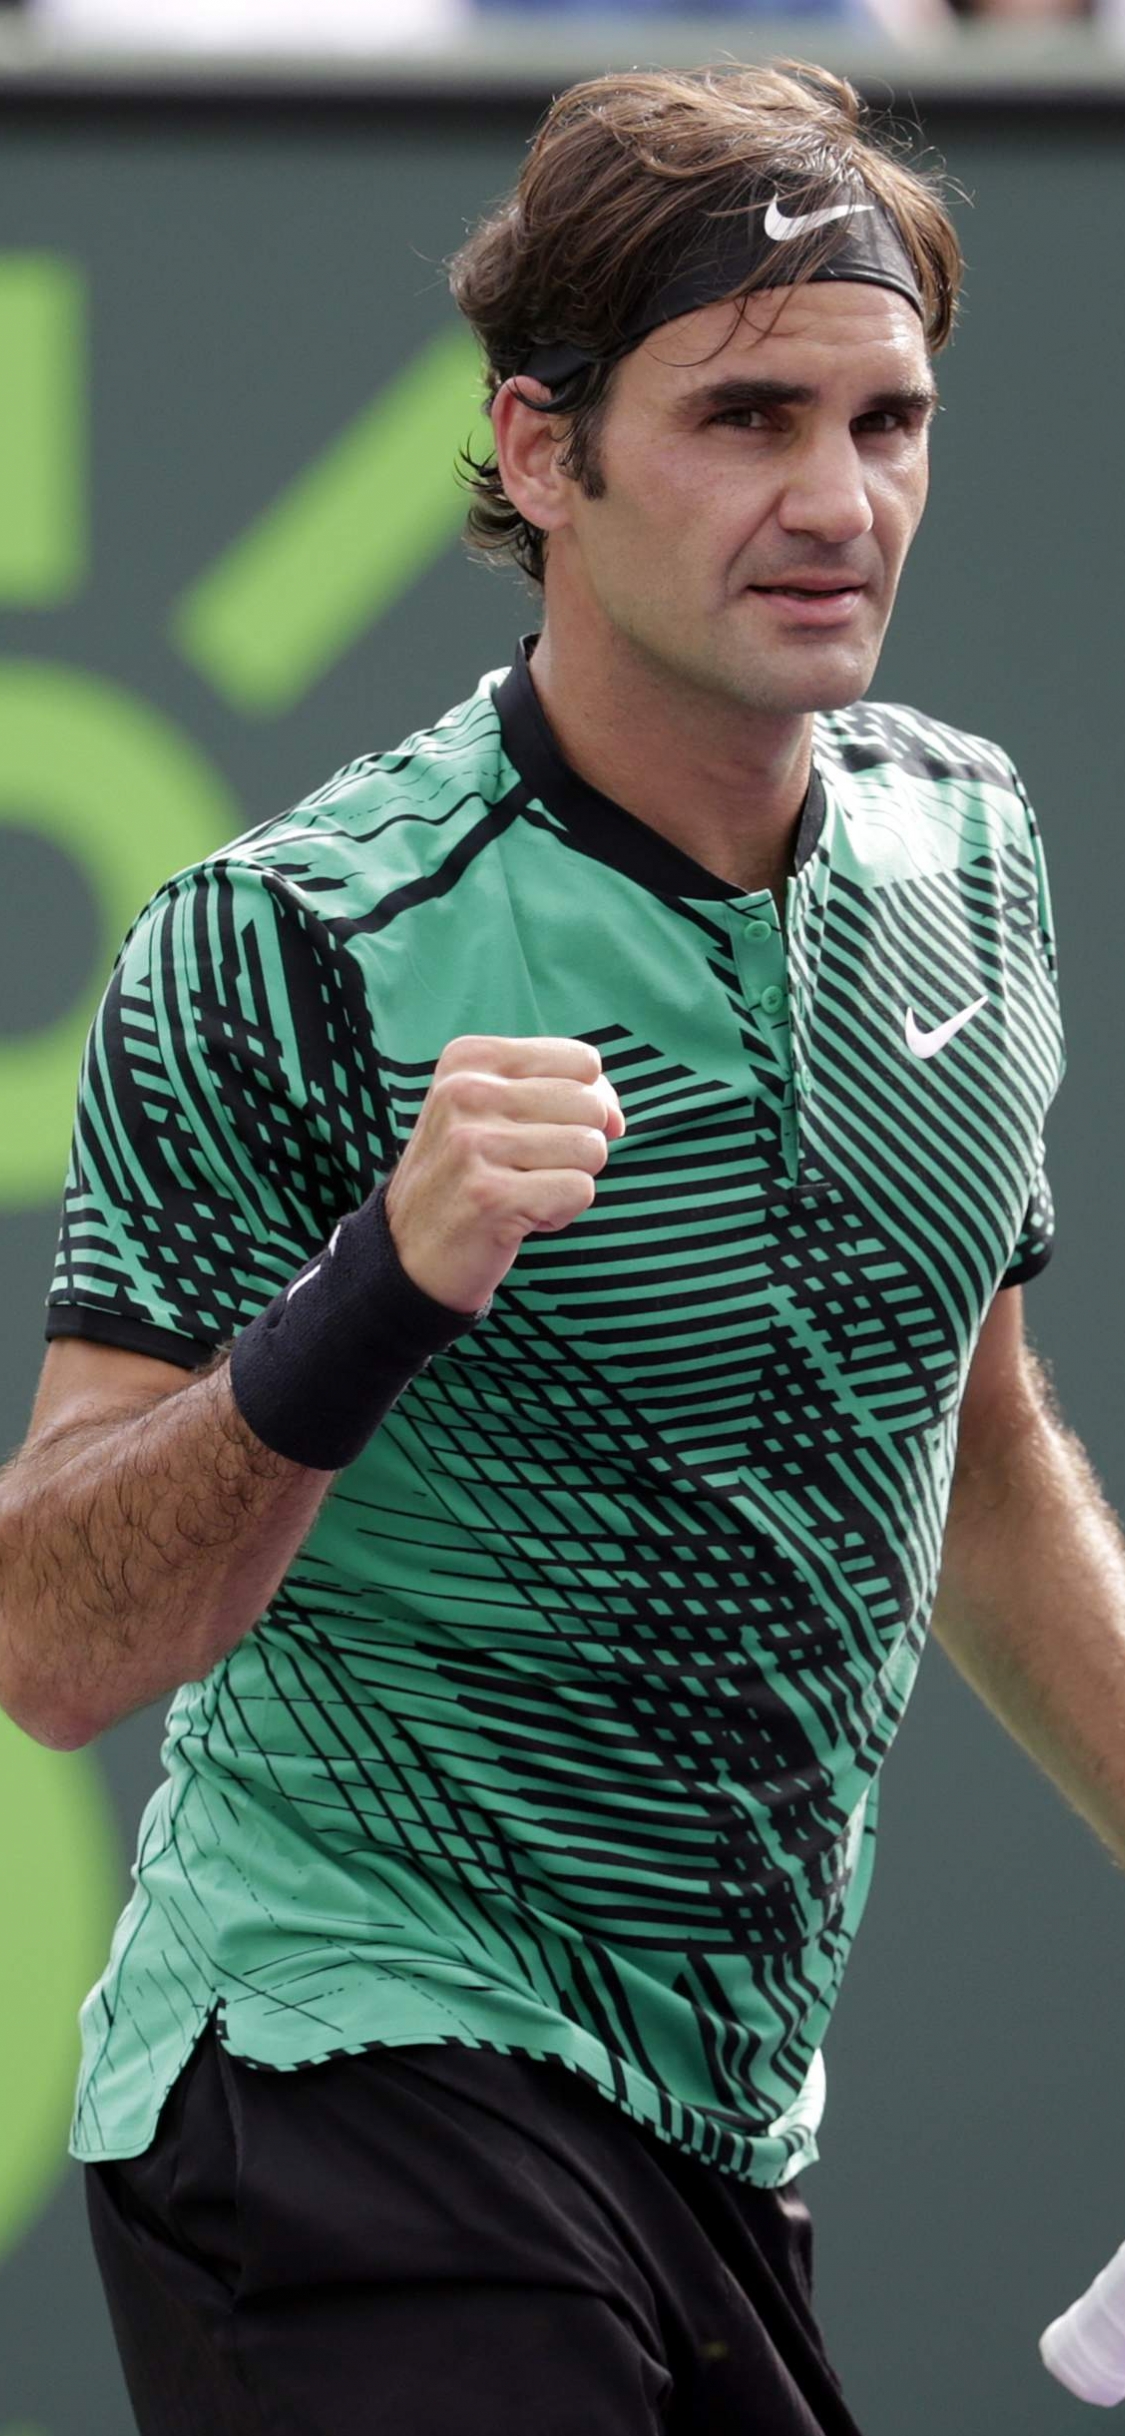 Miami Opens Future Its A Hard One Federer Says The